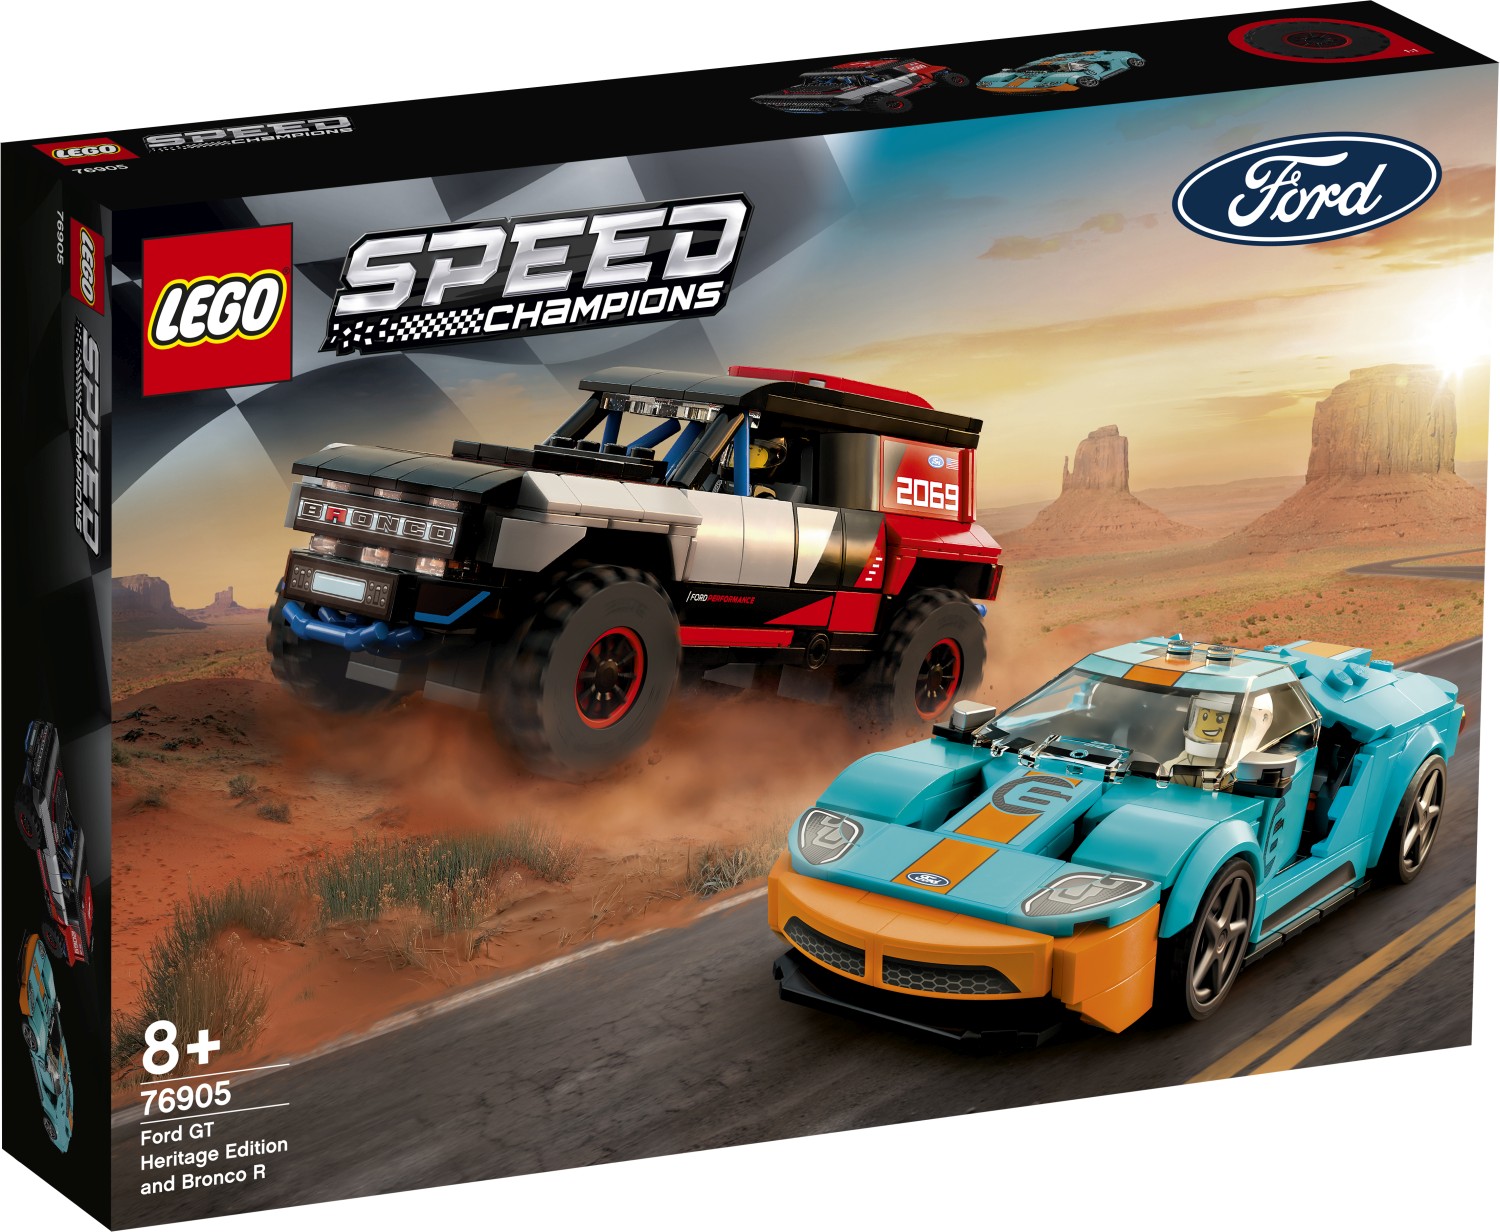 LEGO Speed Champions Summer 2021 Sets Revealed - The Brick Fan